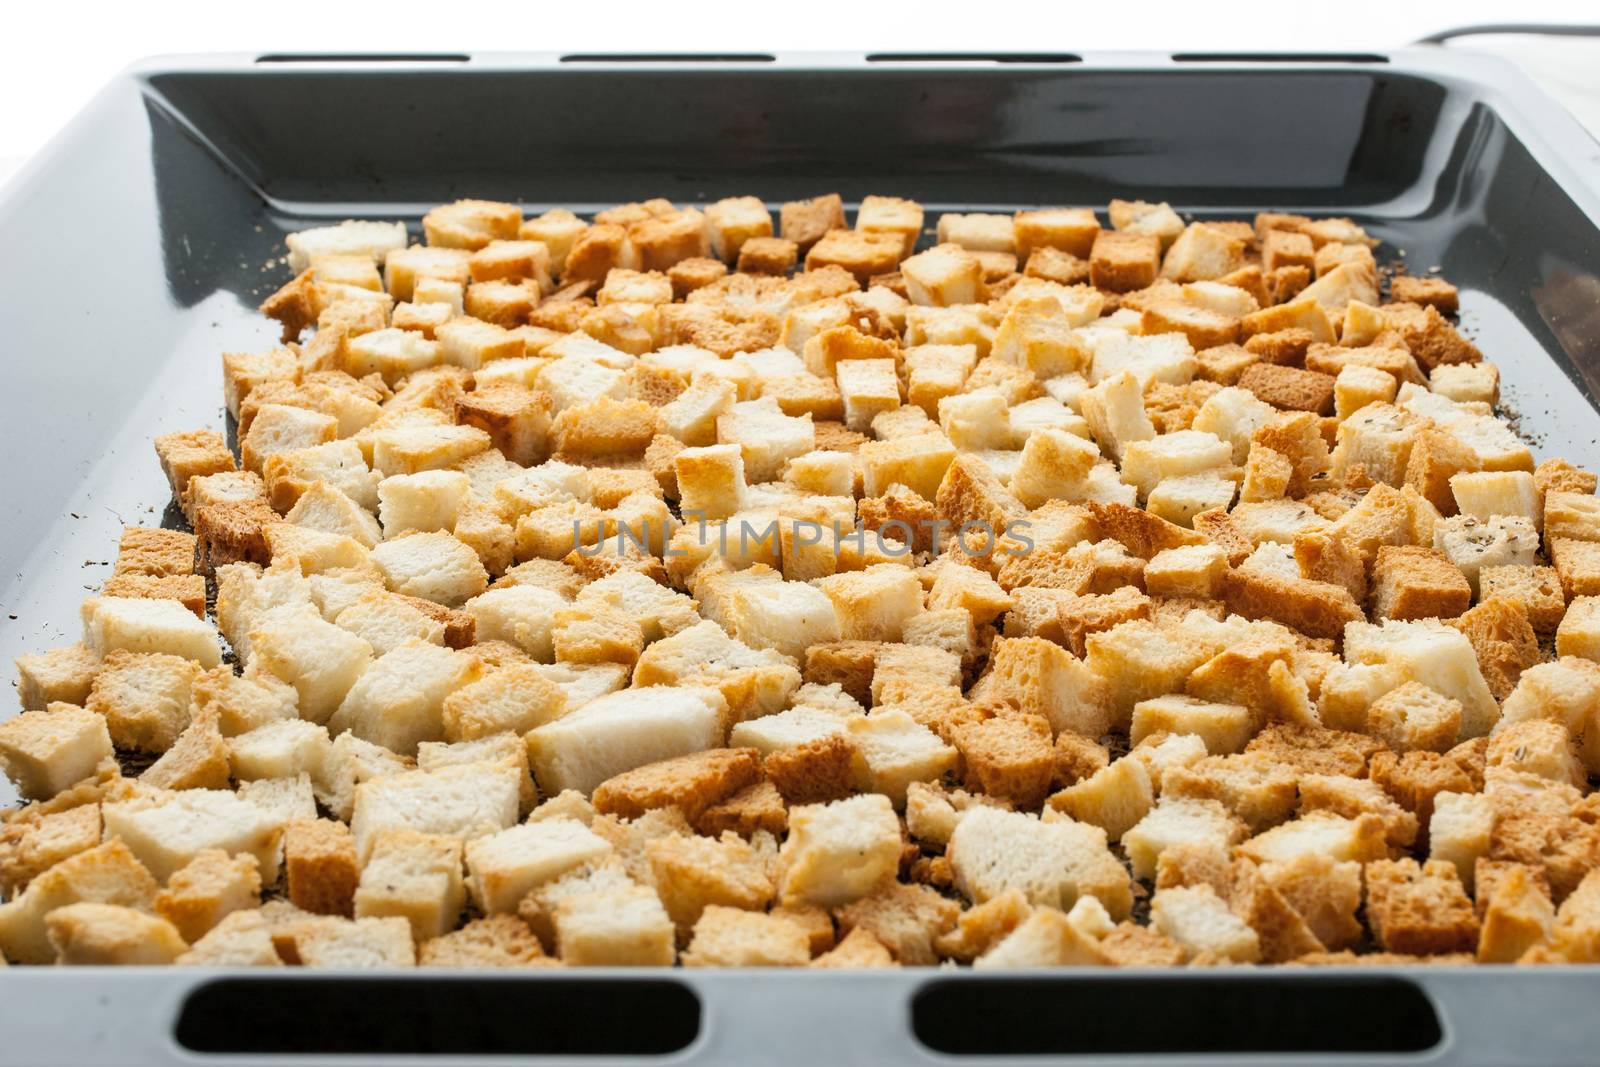 Small croutons on a baking tray horizontal